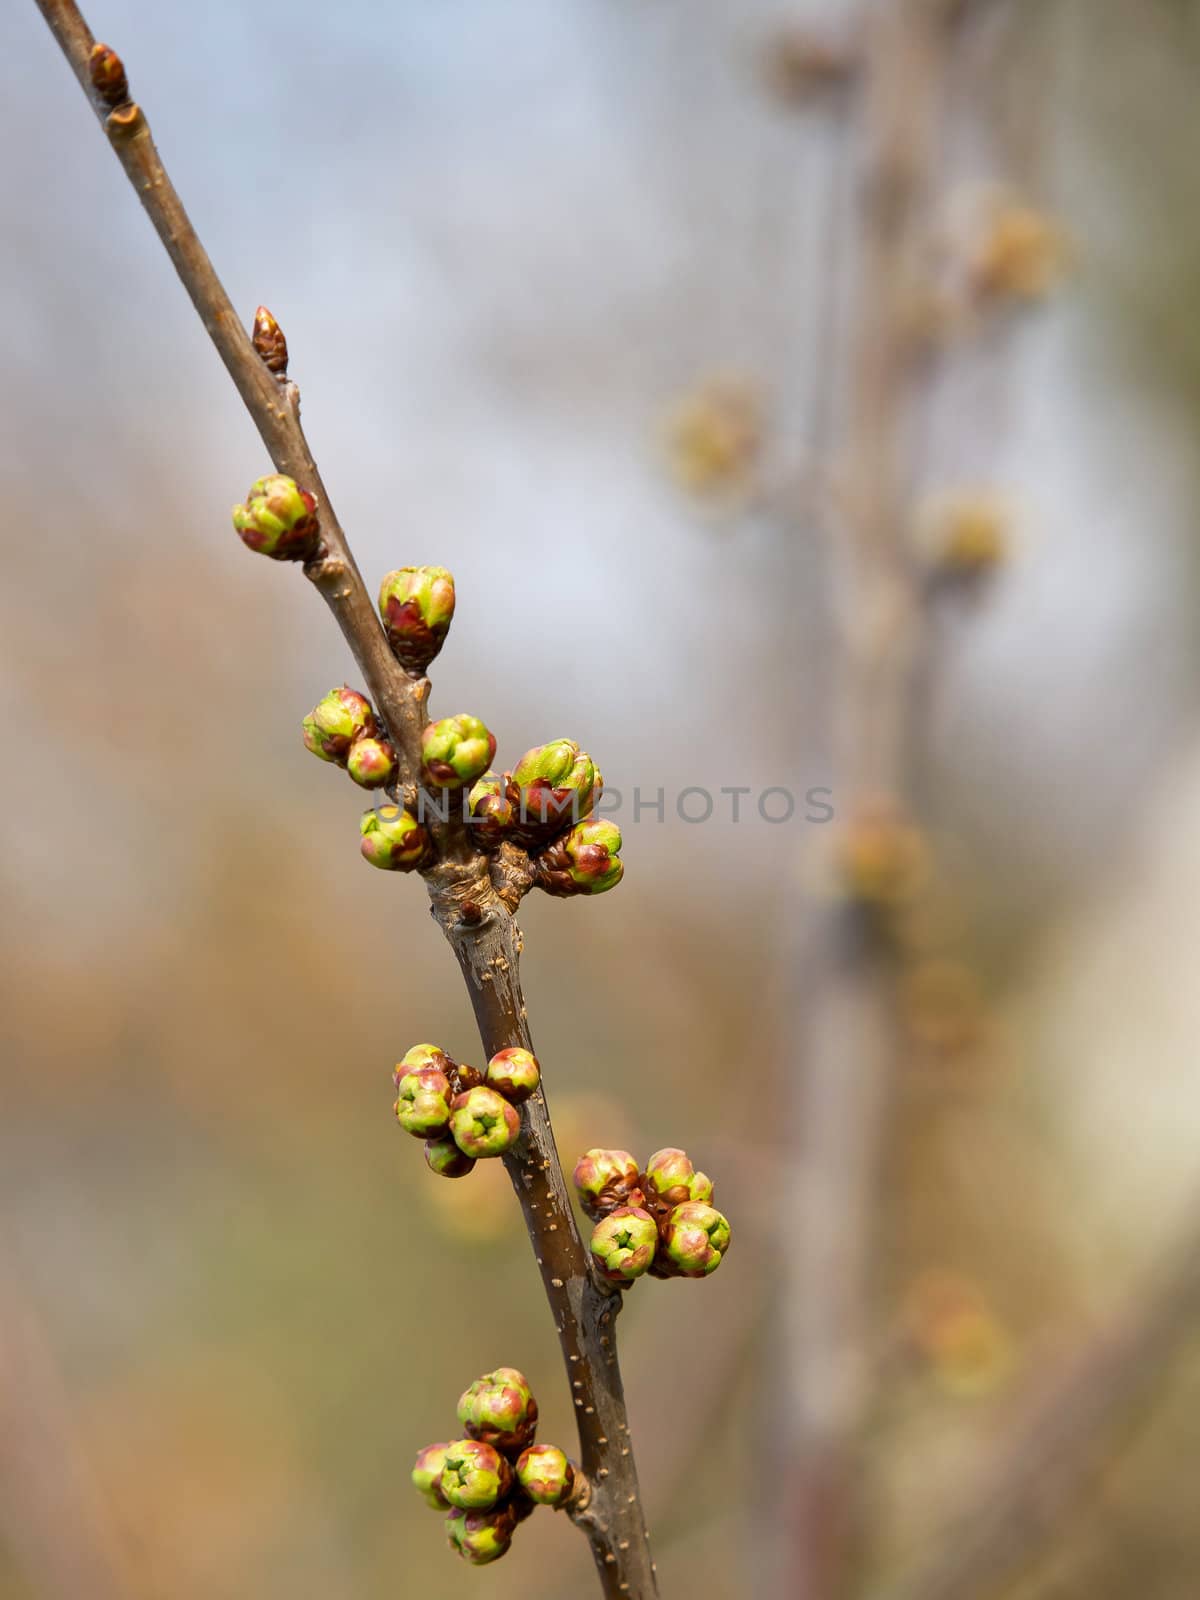 flower buds on a branch of a cherry tree